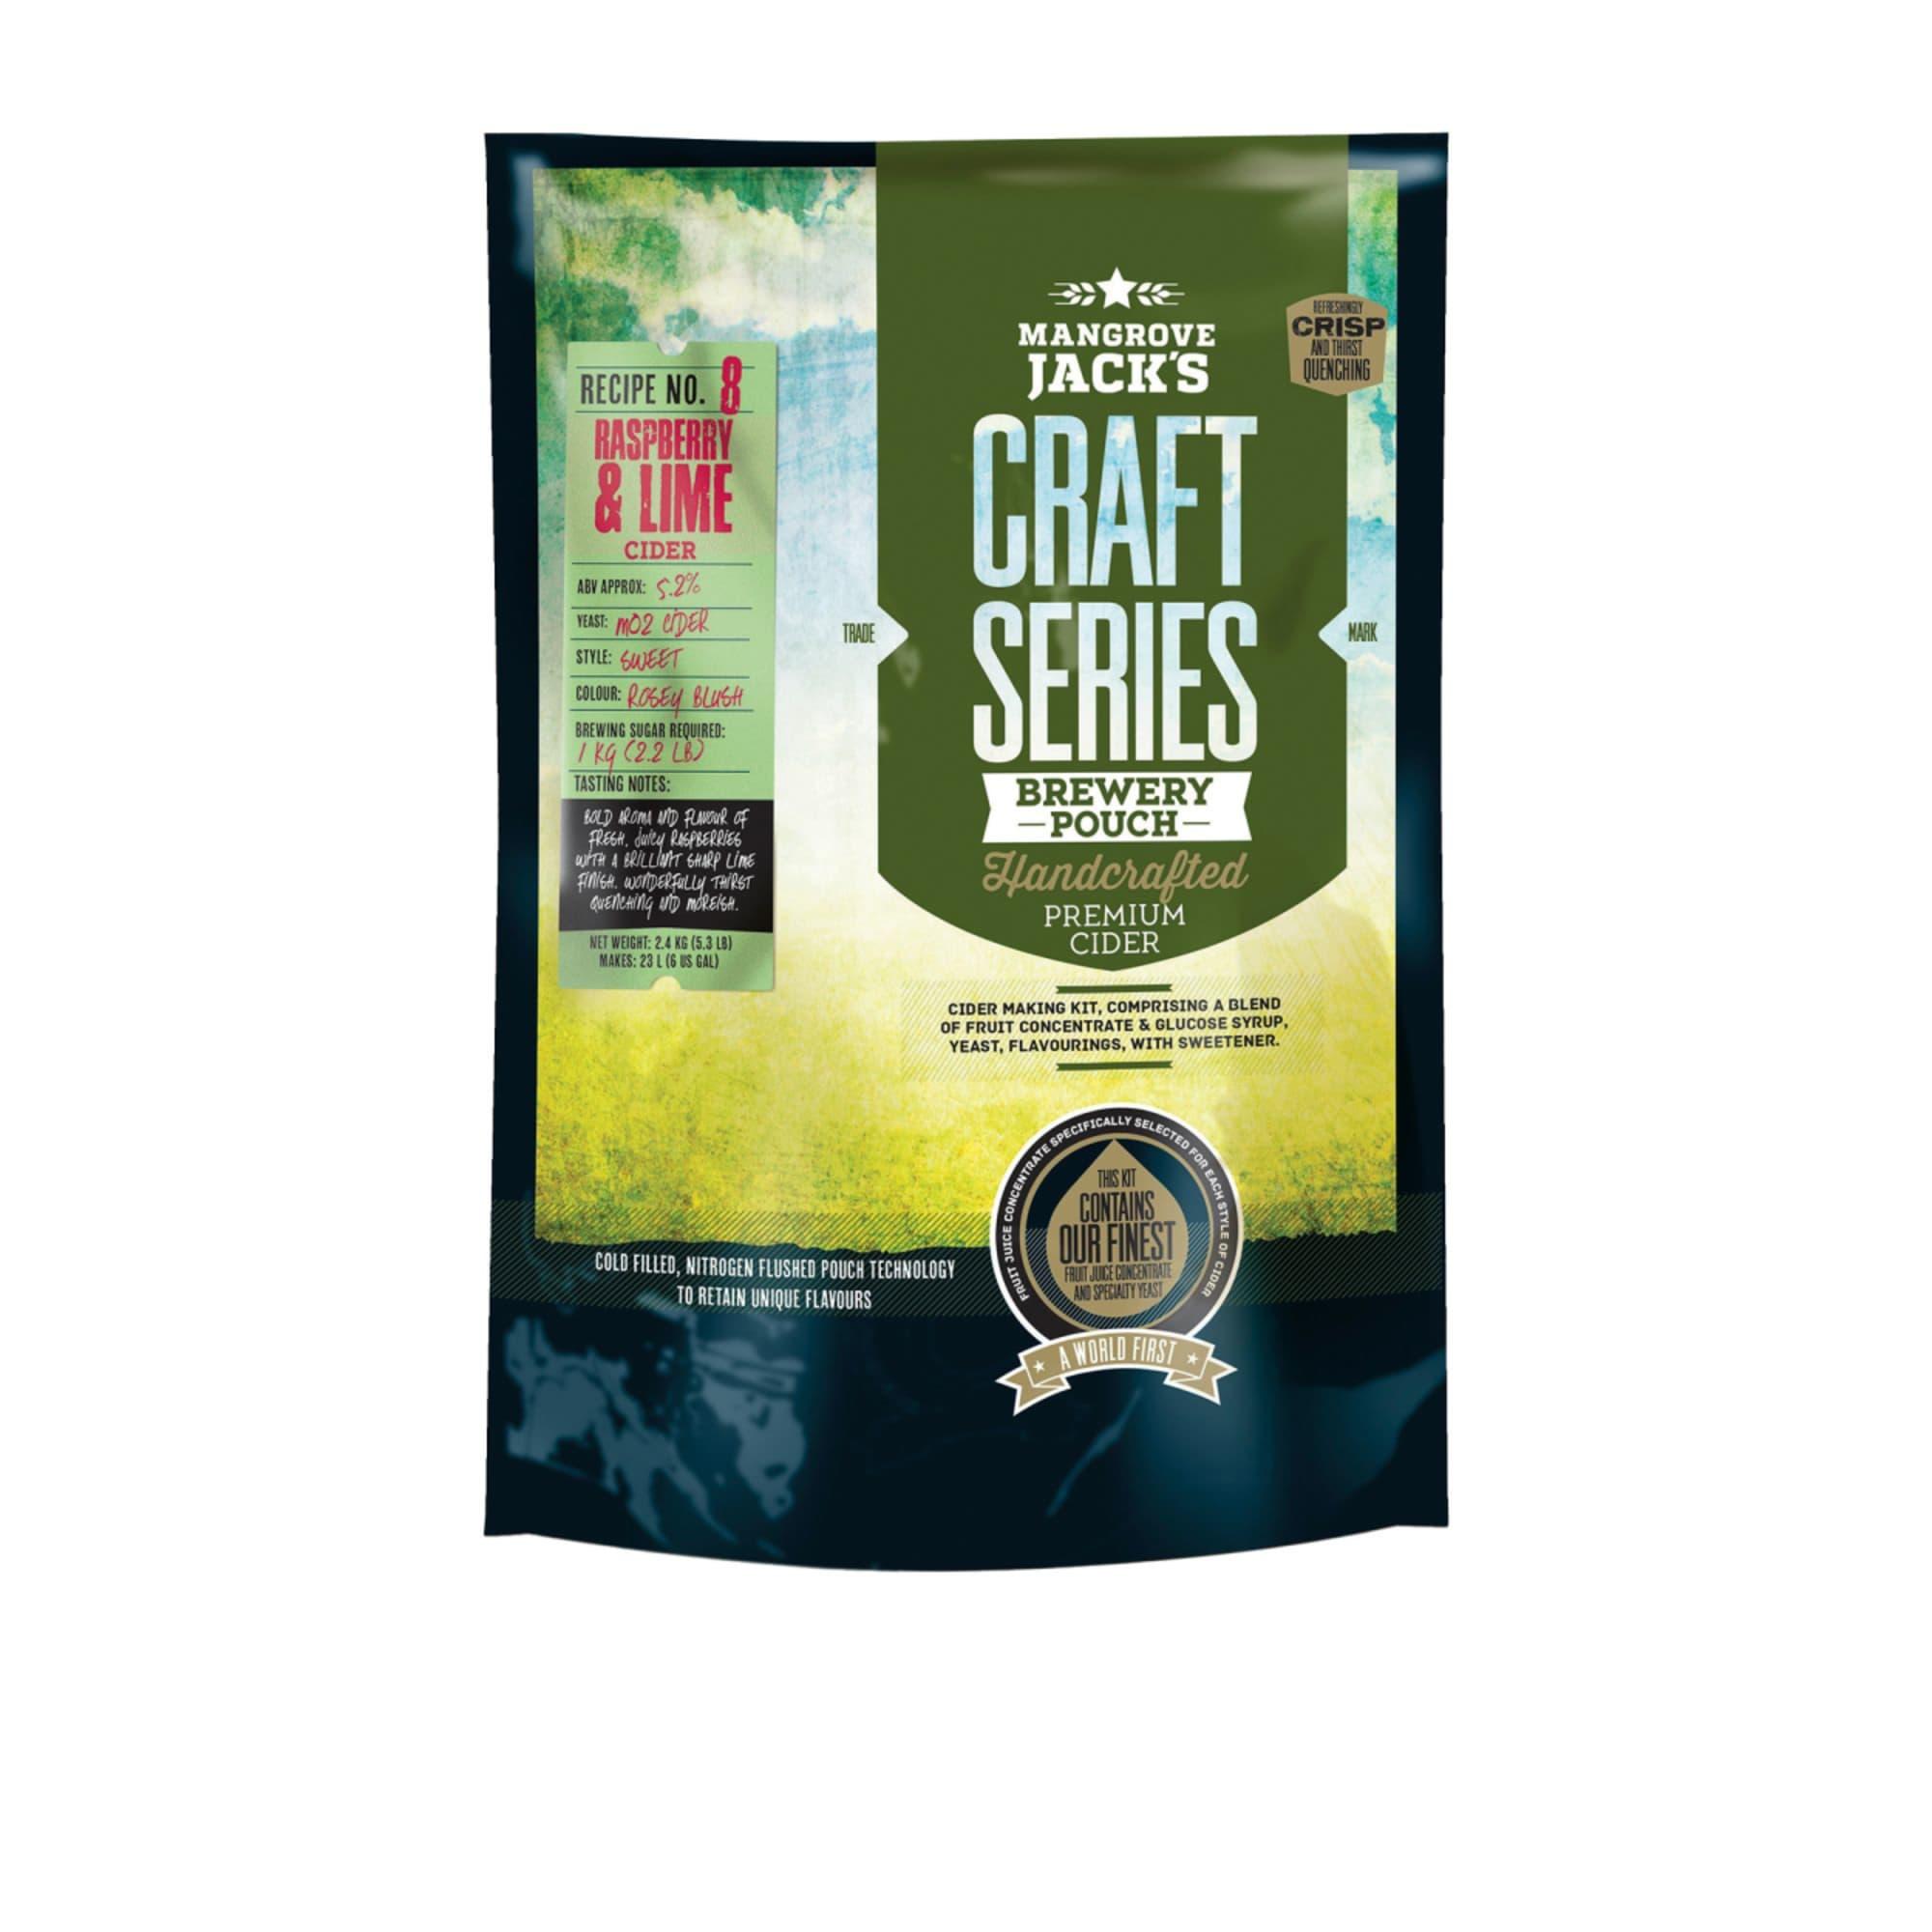 Mangrove Jack's Craft Series Brewery Pouch Raspberry and Lime Cider Image 1